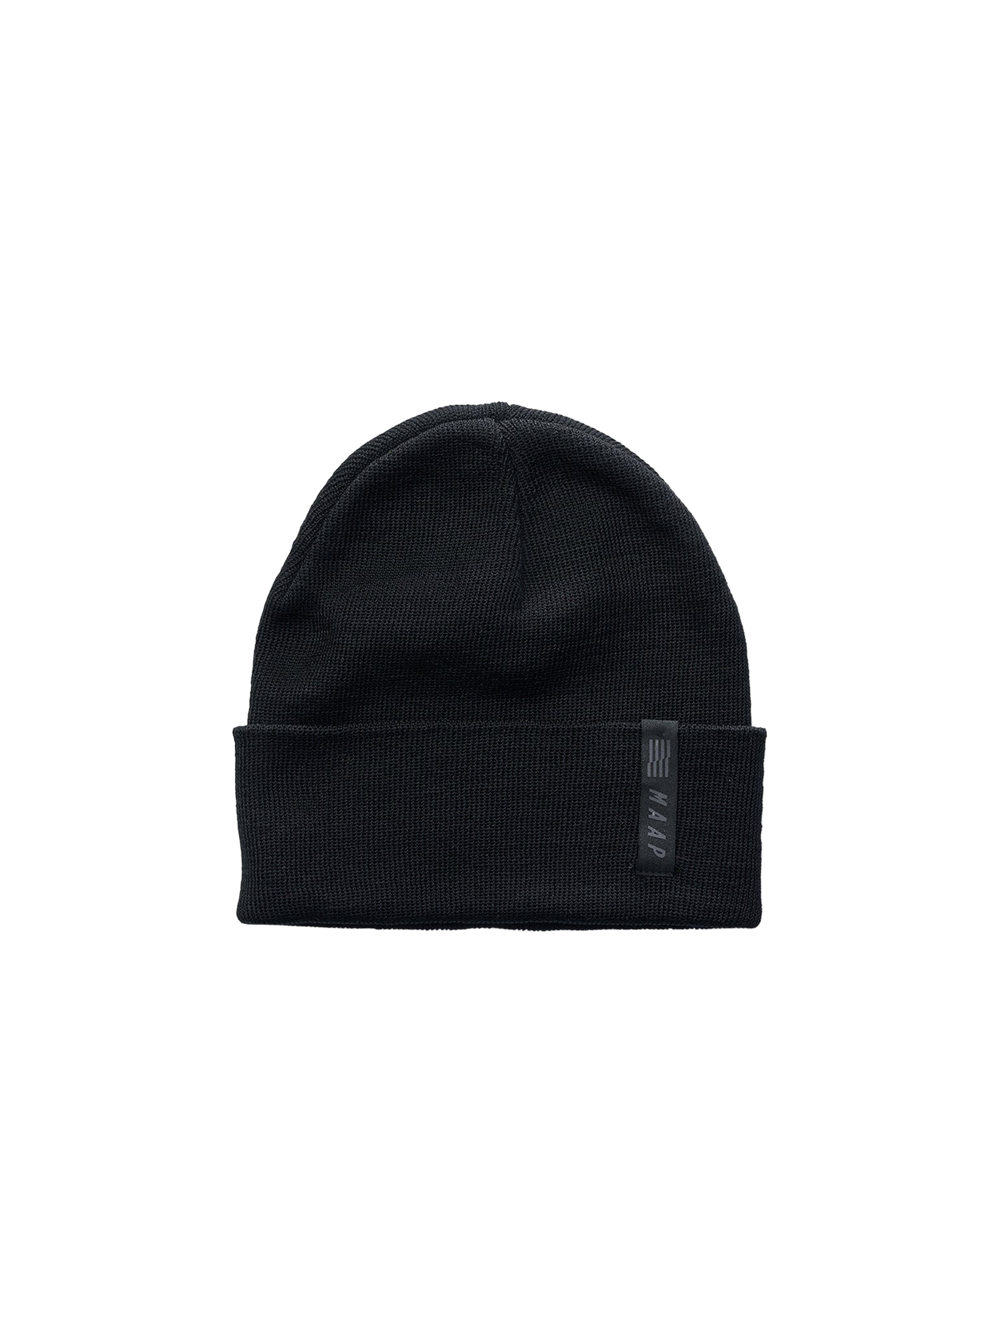 Product Image for Evade Beanie